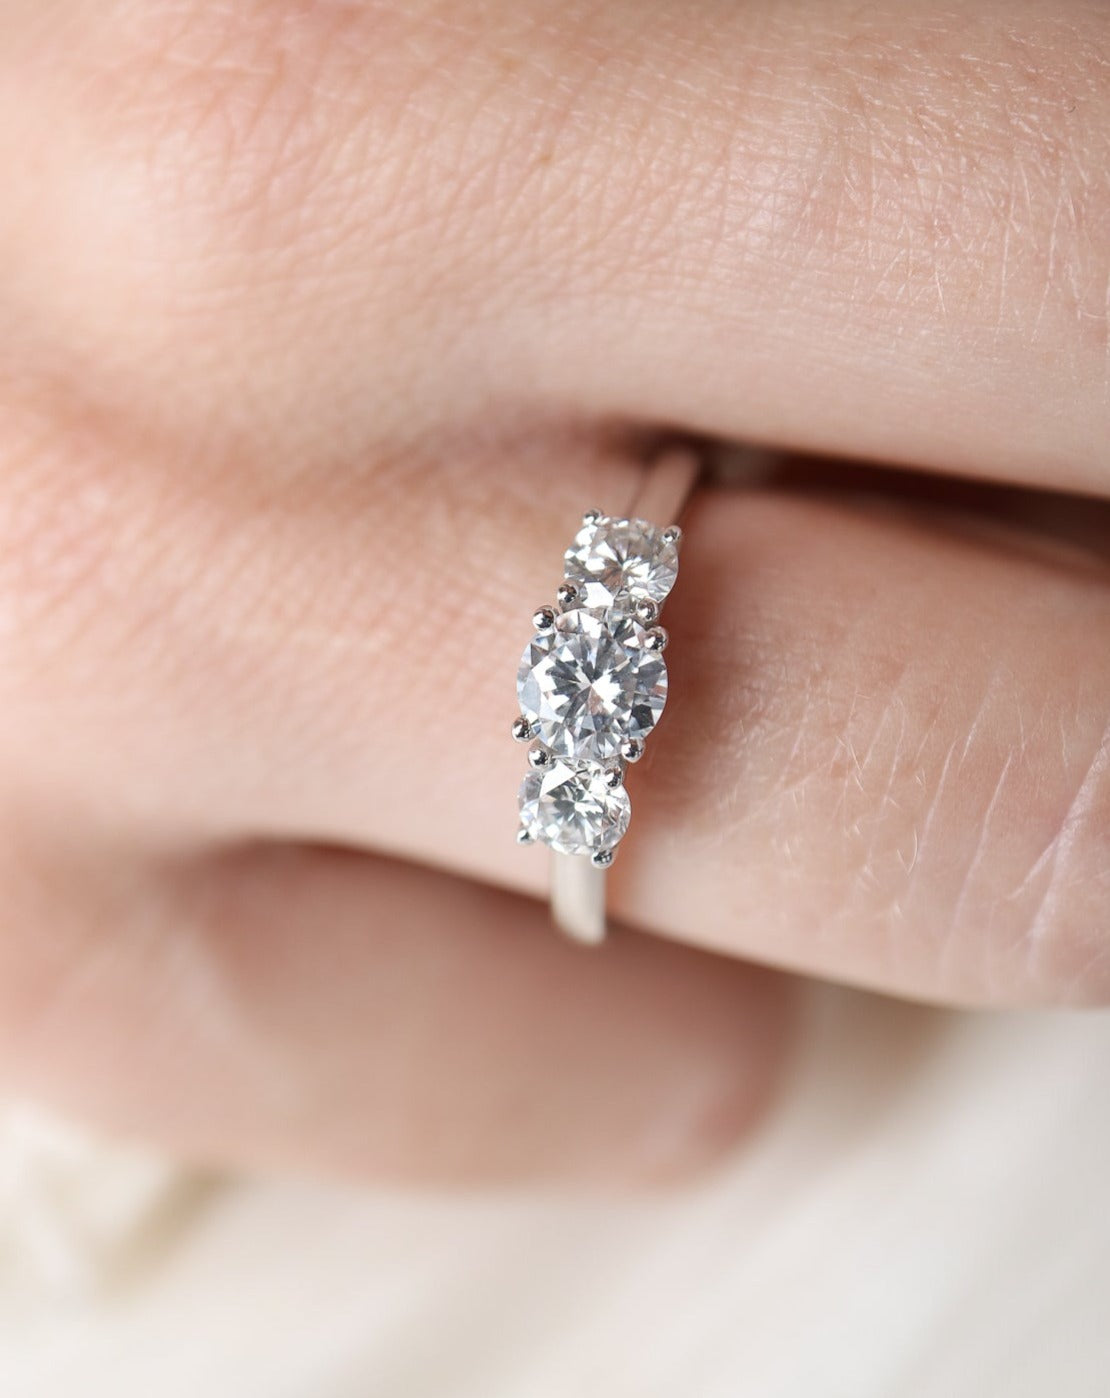 9kt white gold and lab diamond trilogy ring from Collective & Co. jewellery store